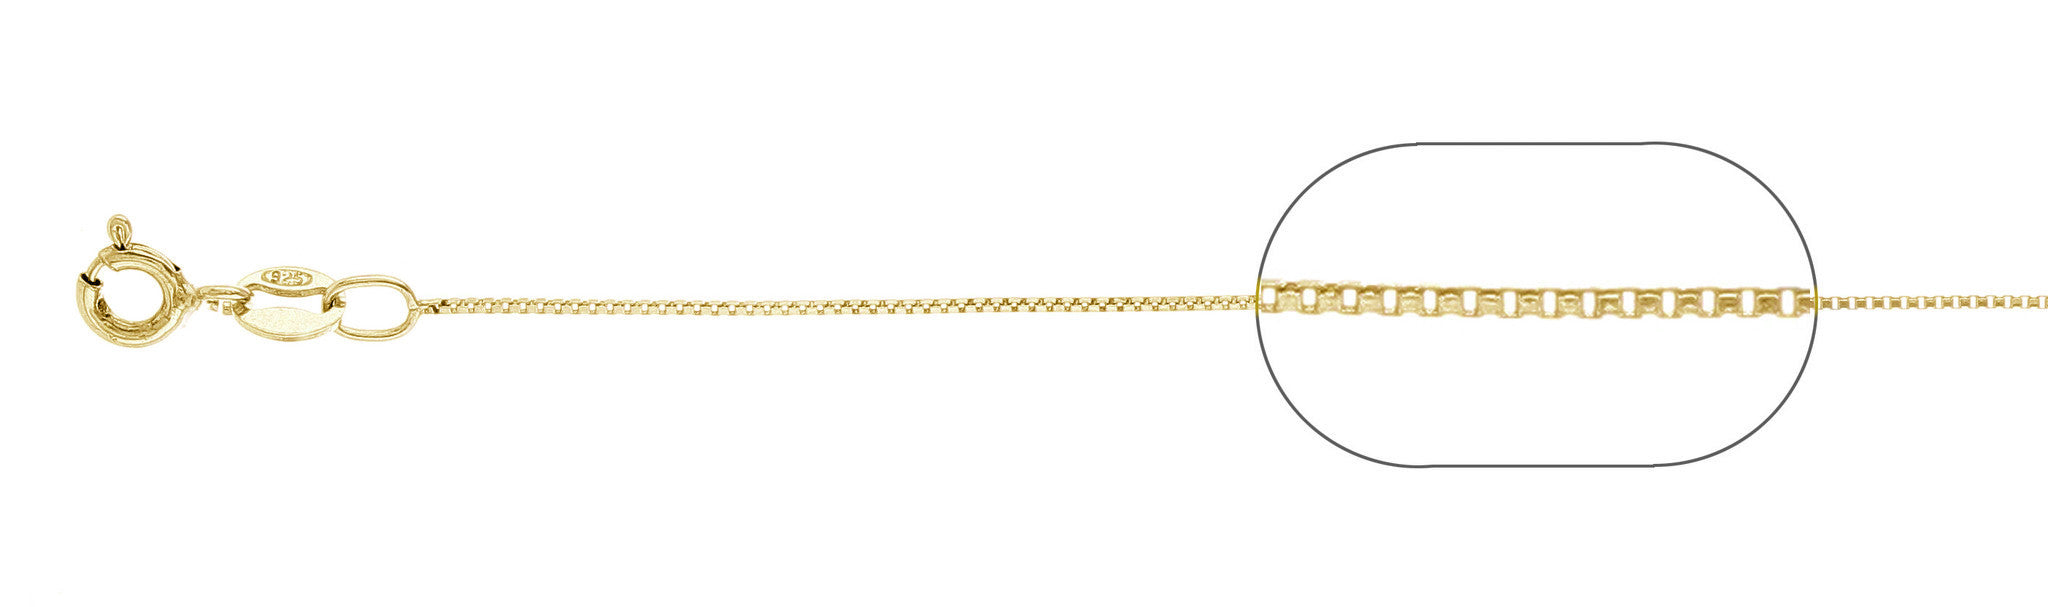 ''012-.7MM Yellow GOLD Plated Box Chain .925  Solid Sterling Silver Sizes 16-32''''''